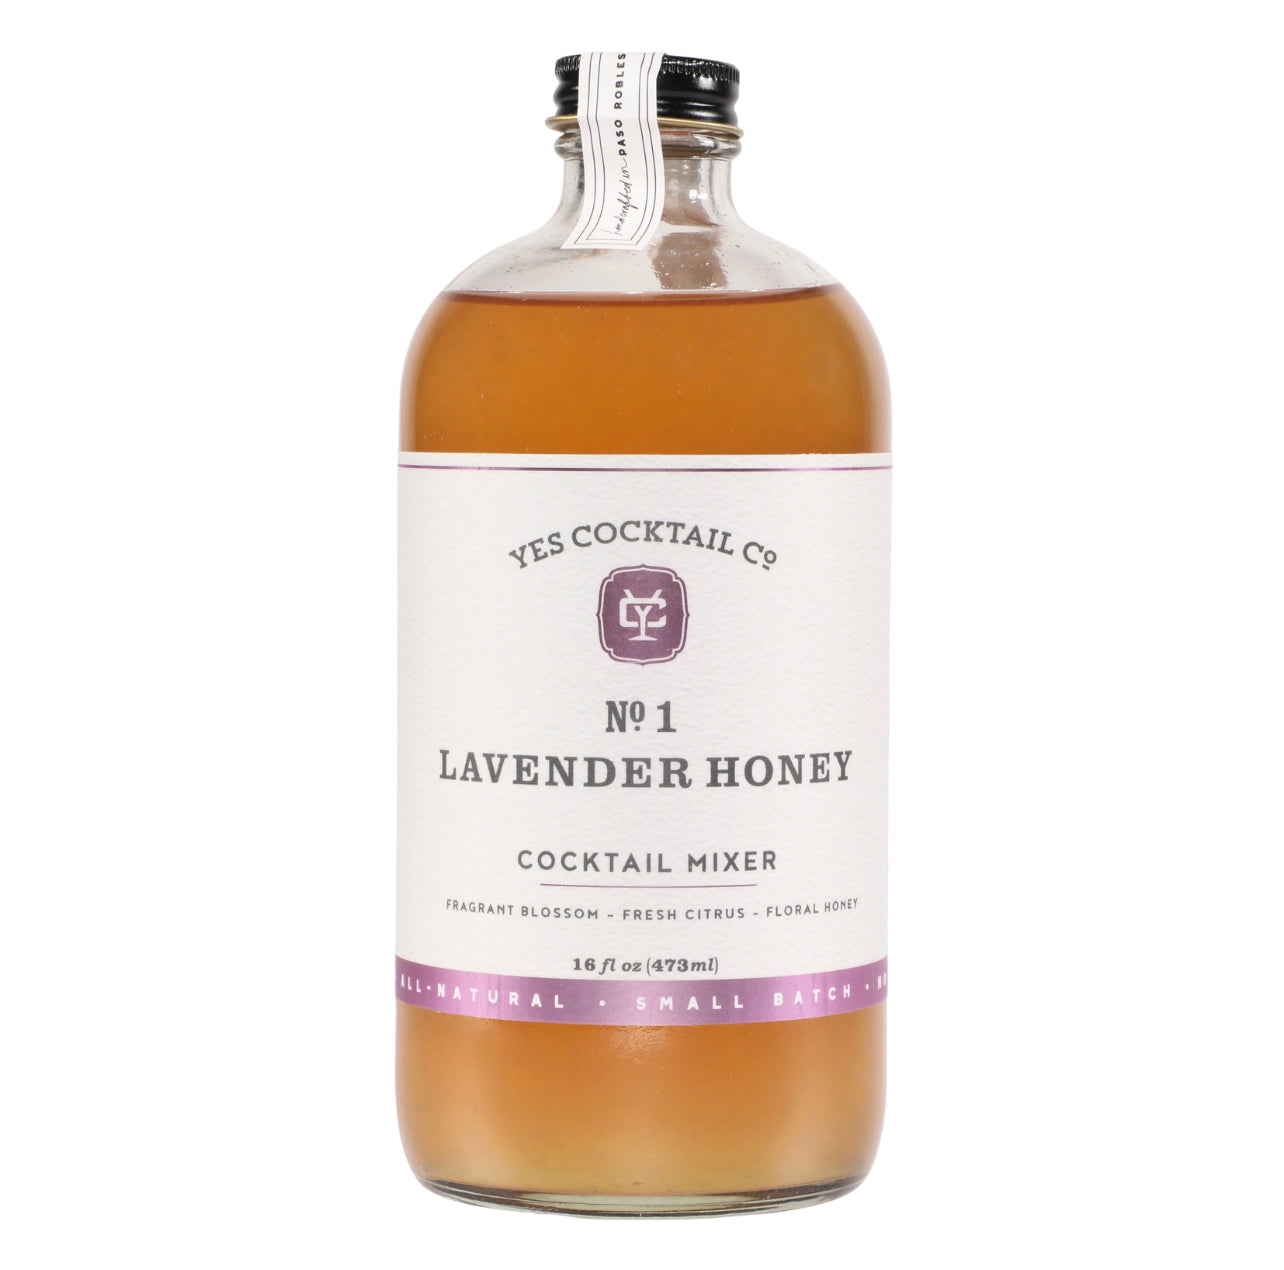 16 oz bottle of handcrafted Lavendar and Honey Cocktail Mixer made by Yes Cocktail Co